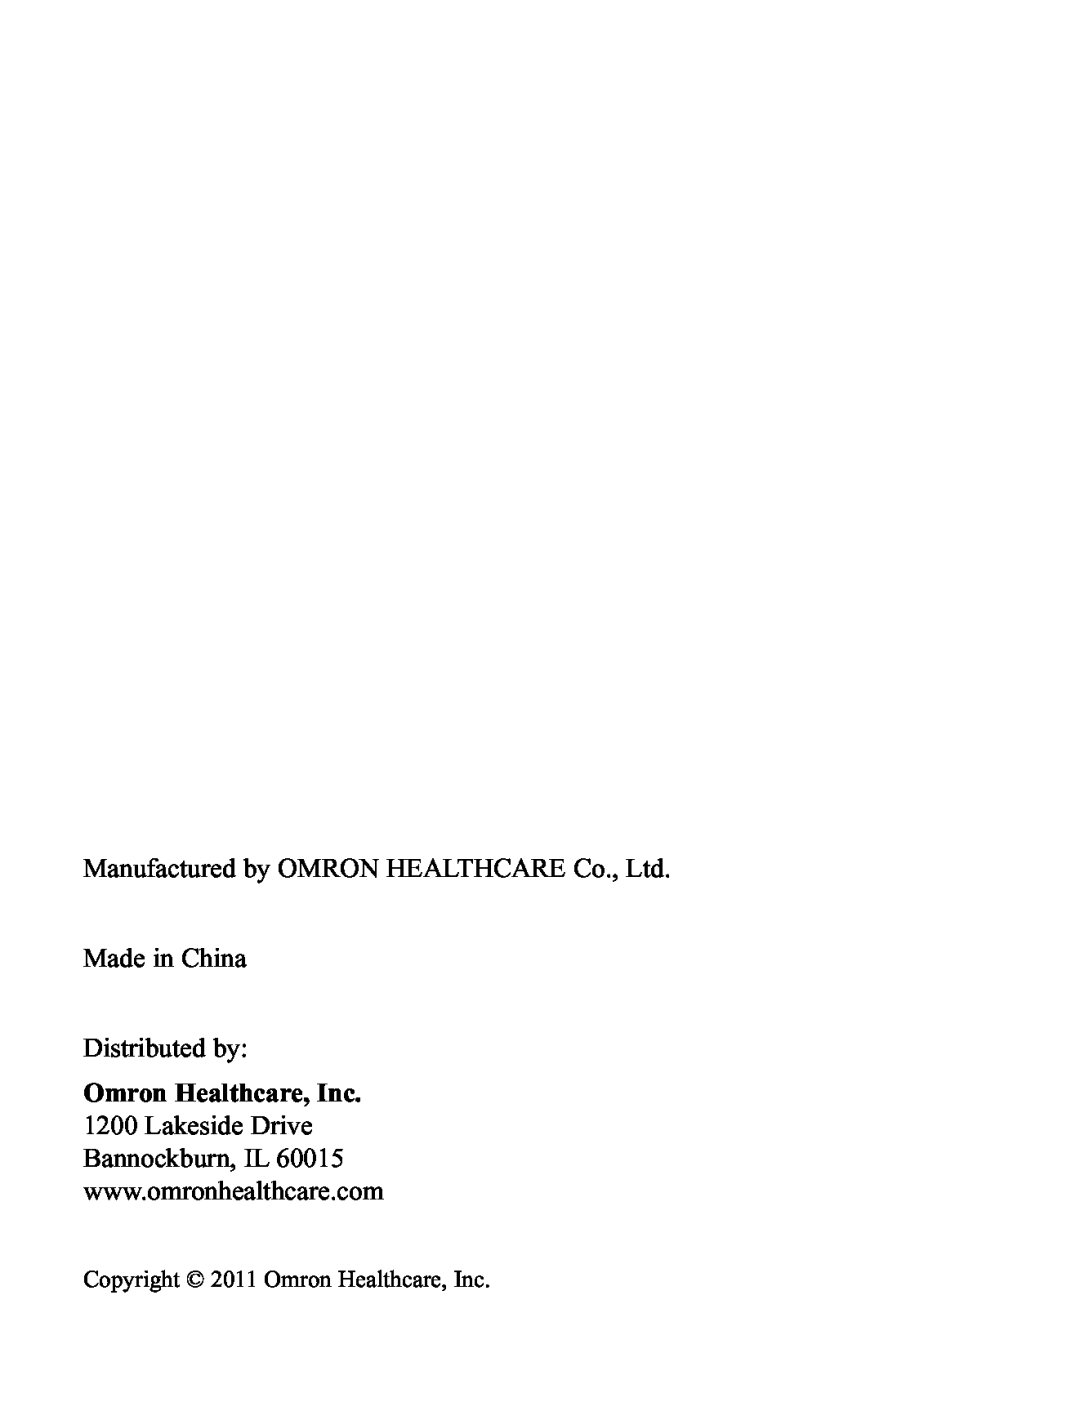 Omron Healthcare BP791IT instruction manual Made in China Distributed by, Copyright 2011 Omron Healthcare, Inc 